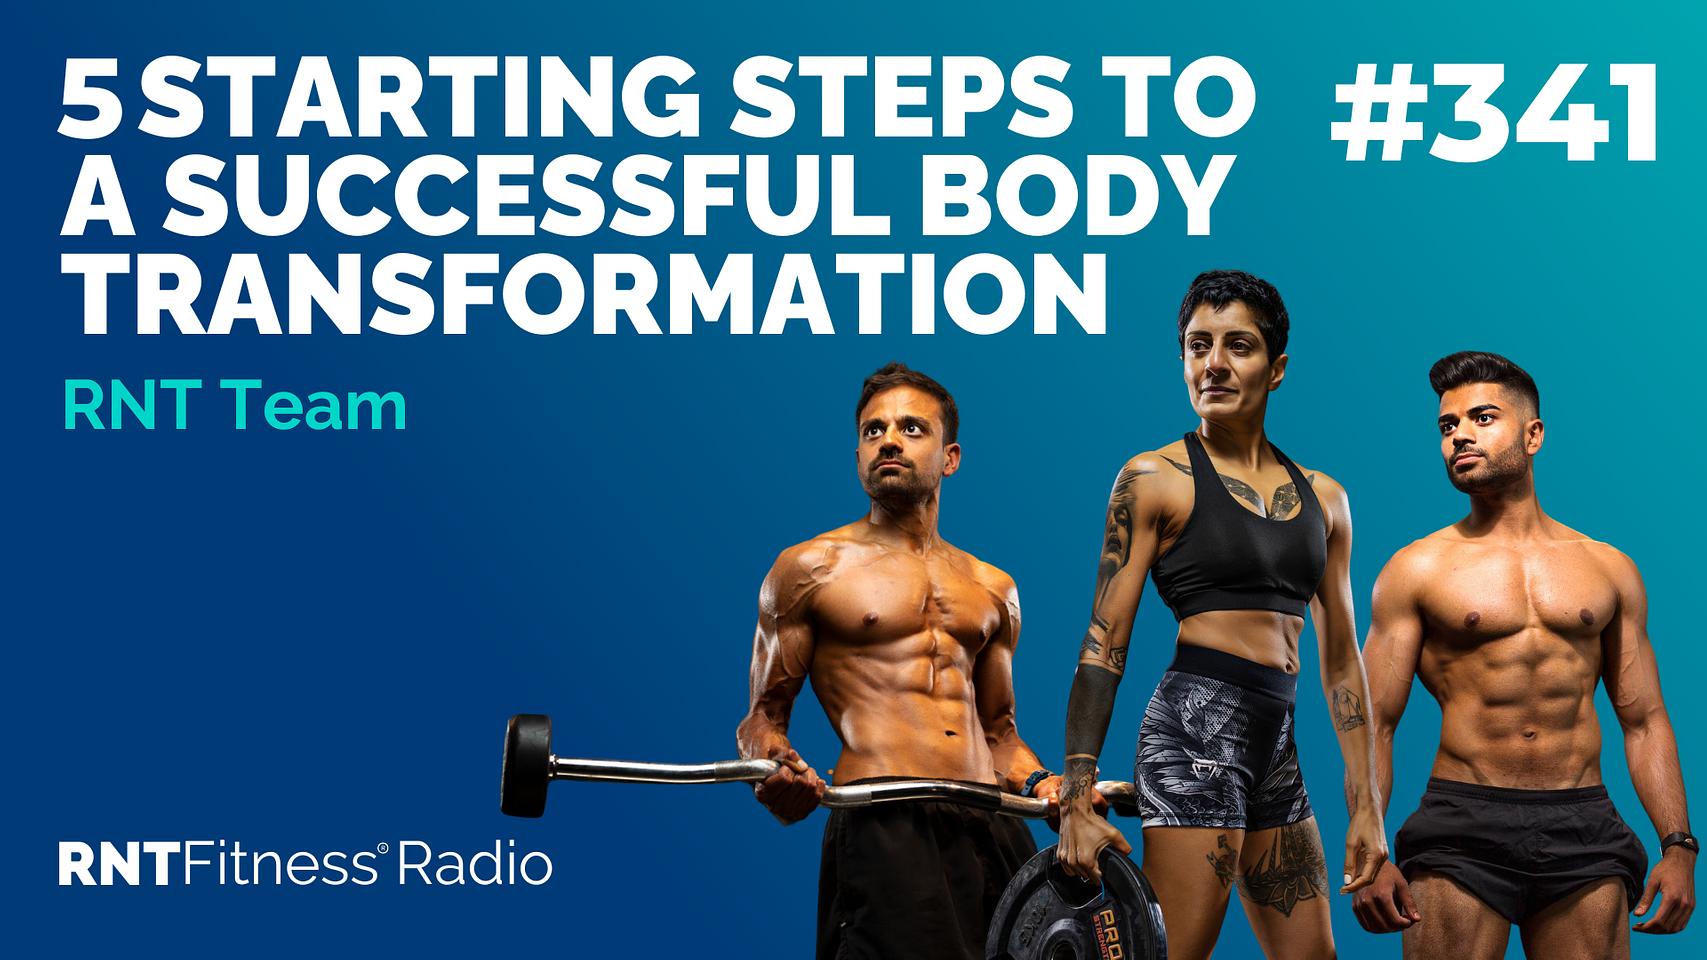 Ep 341 - 5 Starting Steps To A Successful Body Transformation